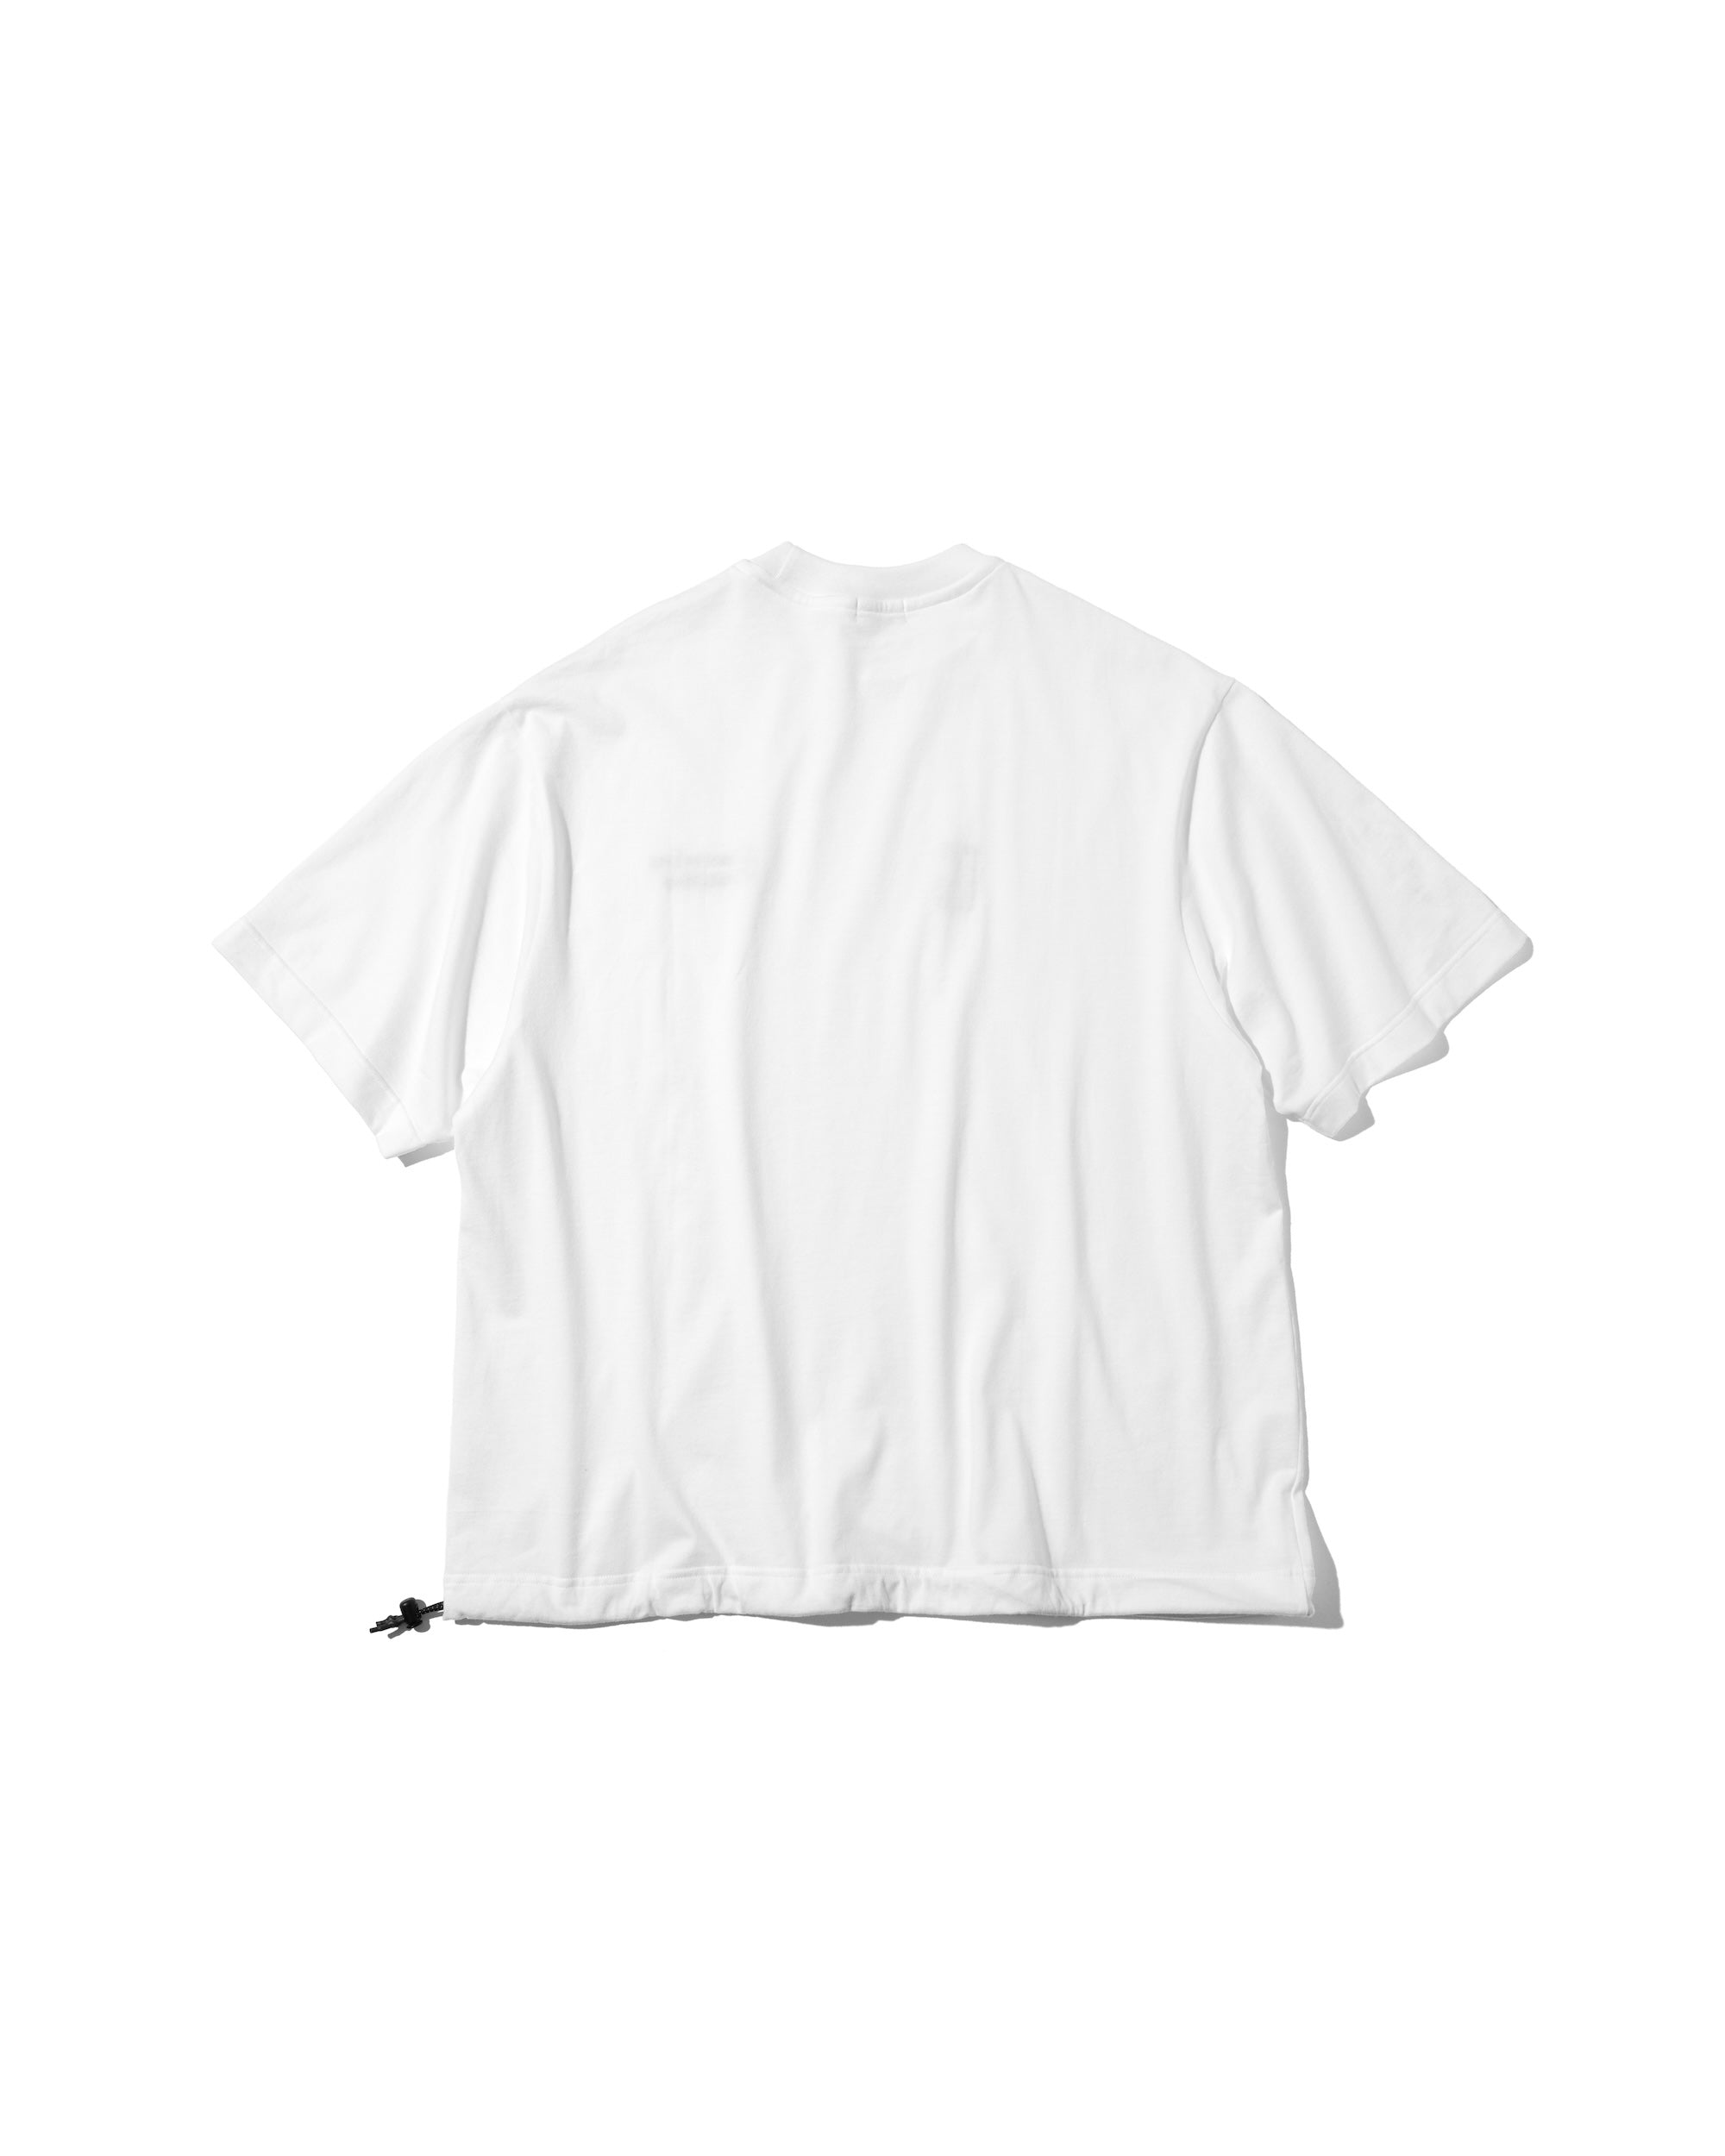 【7.6 SAT 20:00- IN STOCK】“C” MASSIVE S/S T-SHIRT WITH DRAWSTRINGS